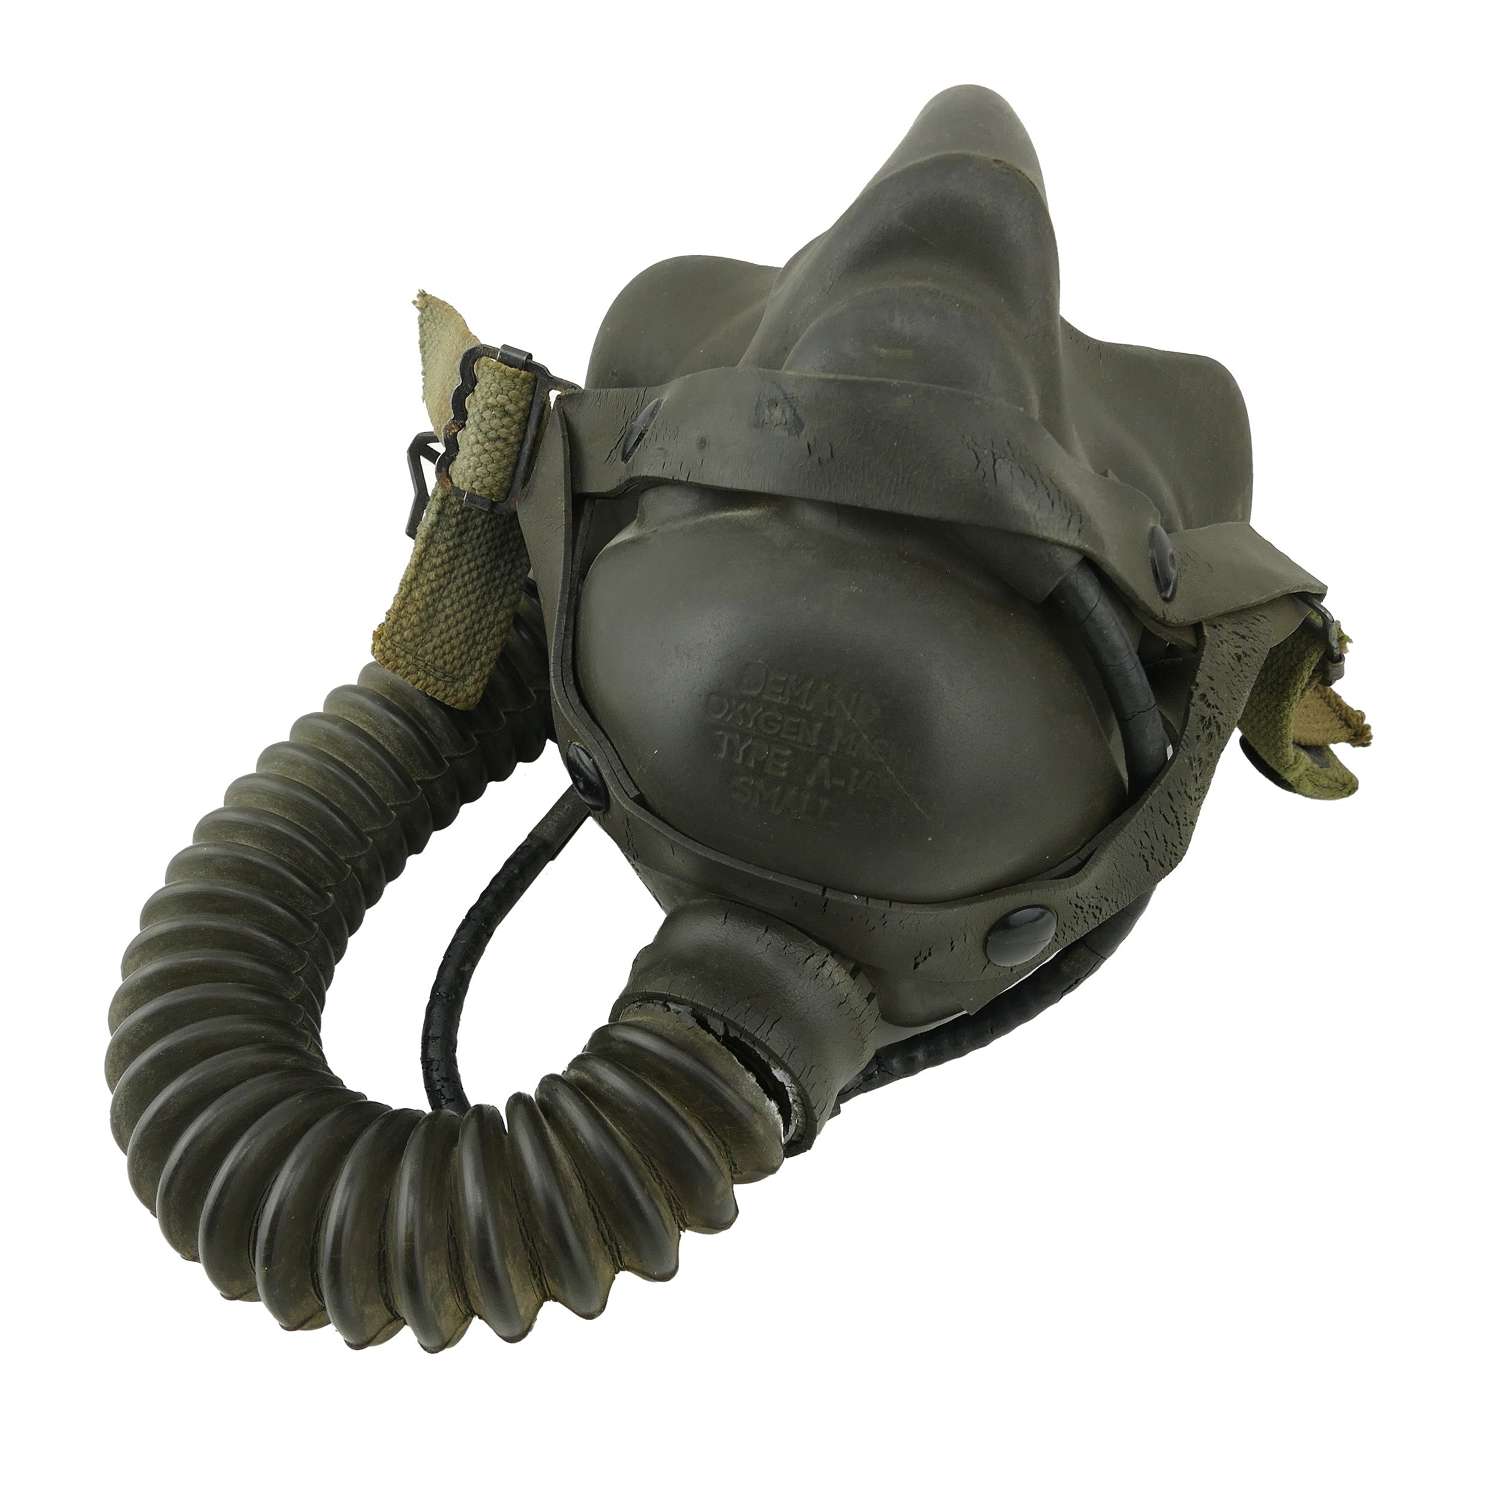 USAAF A-14 oxygen mask, wired